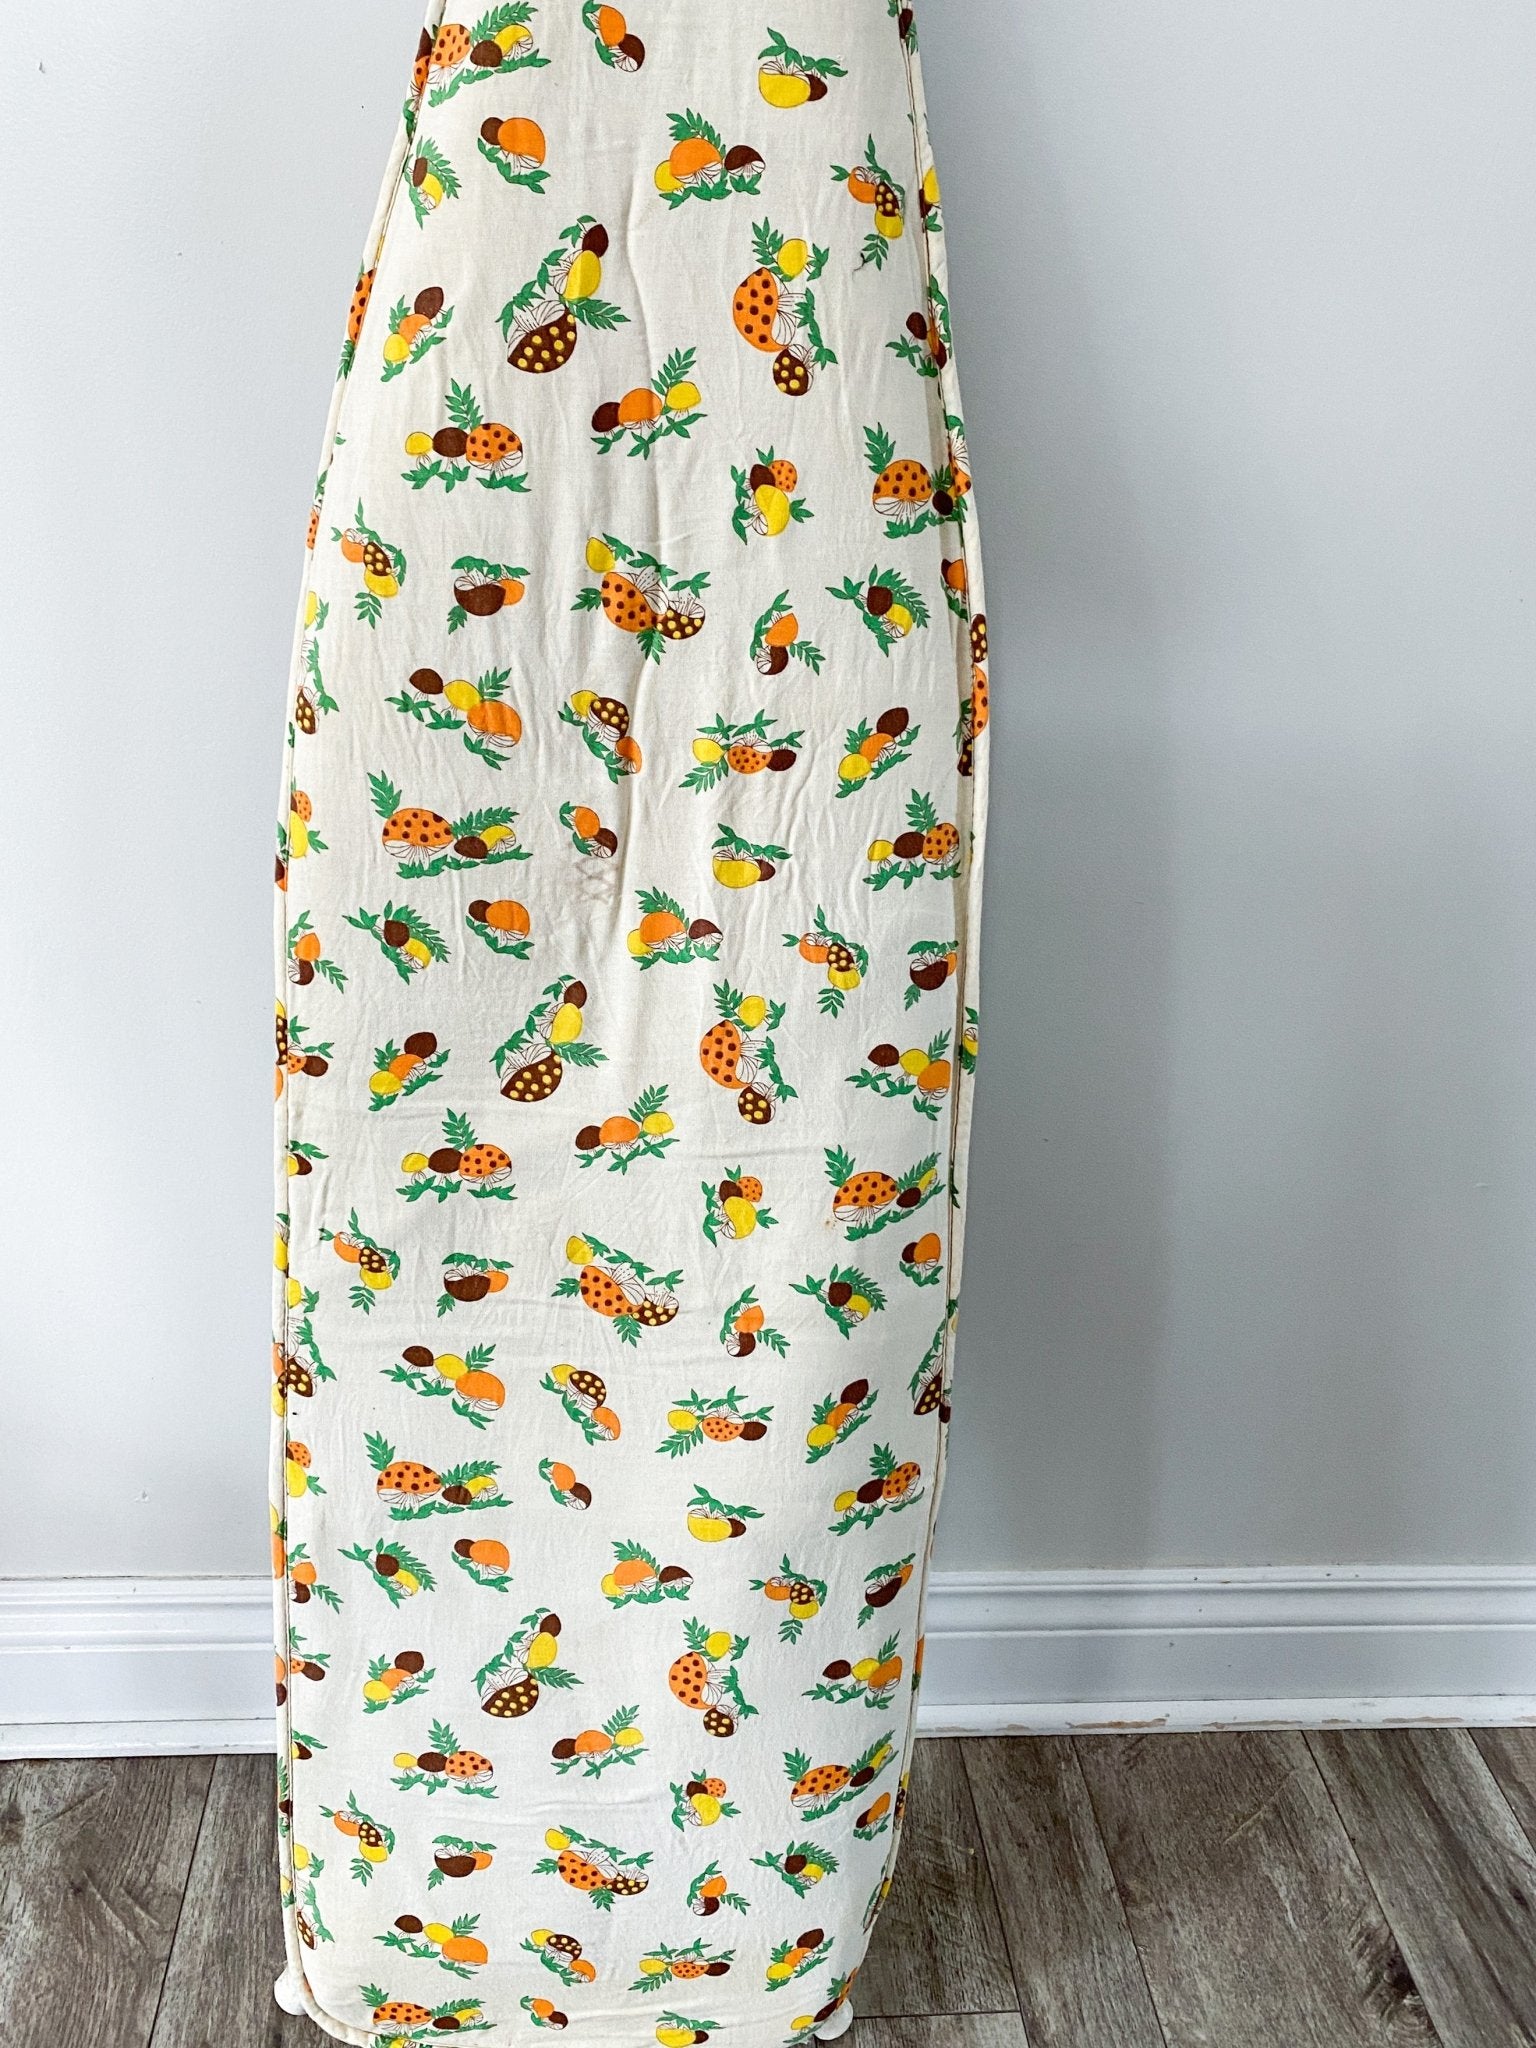 Nearly full frontal of the ironing board cover perfectly fitting over a standard sized ironing board. The pattern is busy with yellow, orange and brown mushrooms of various but similar sizes.